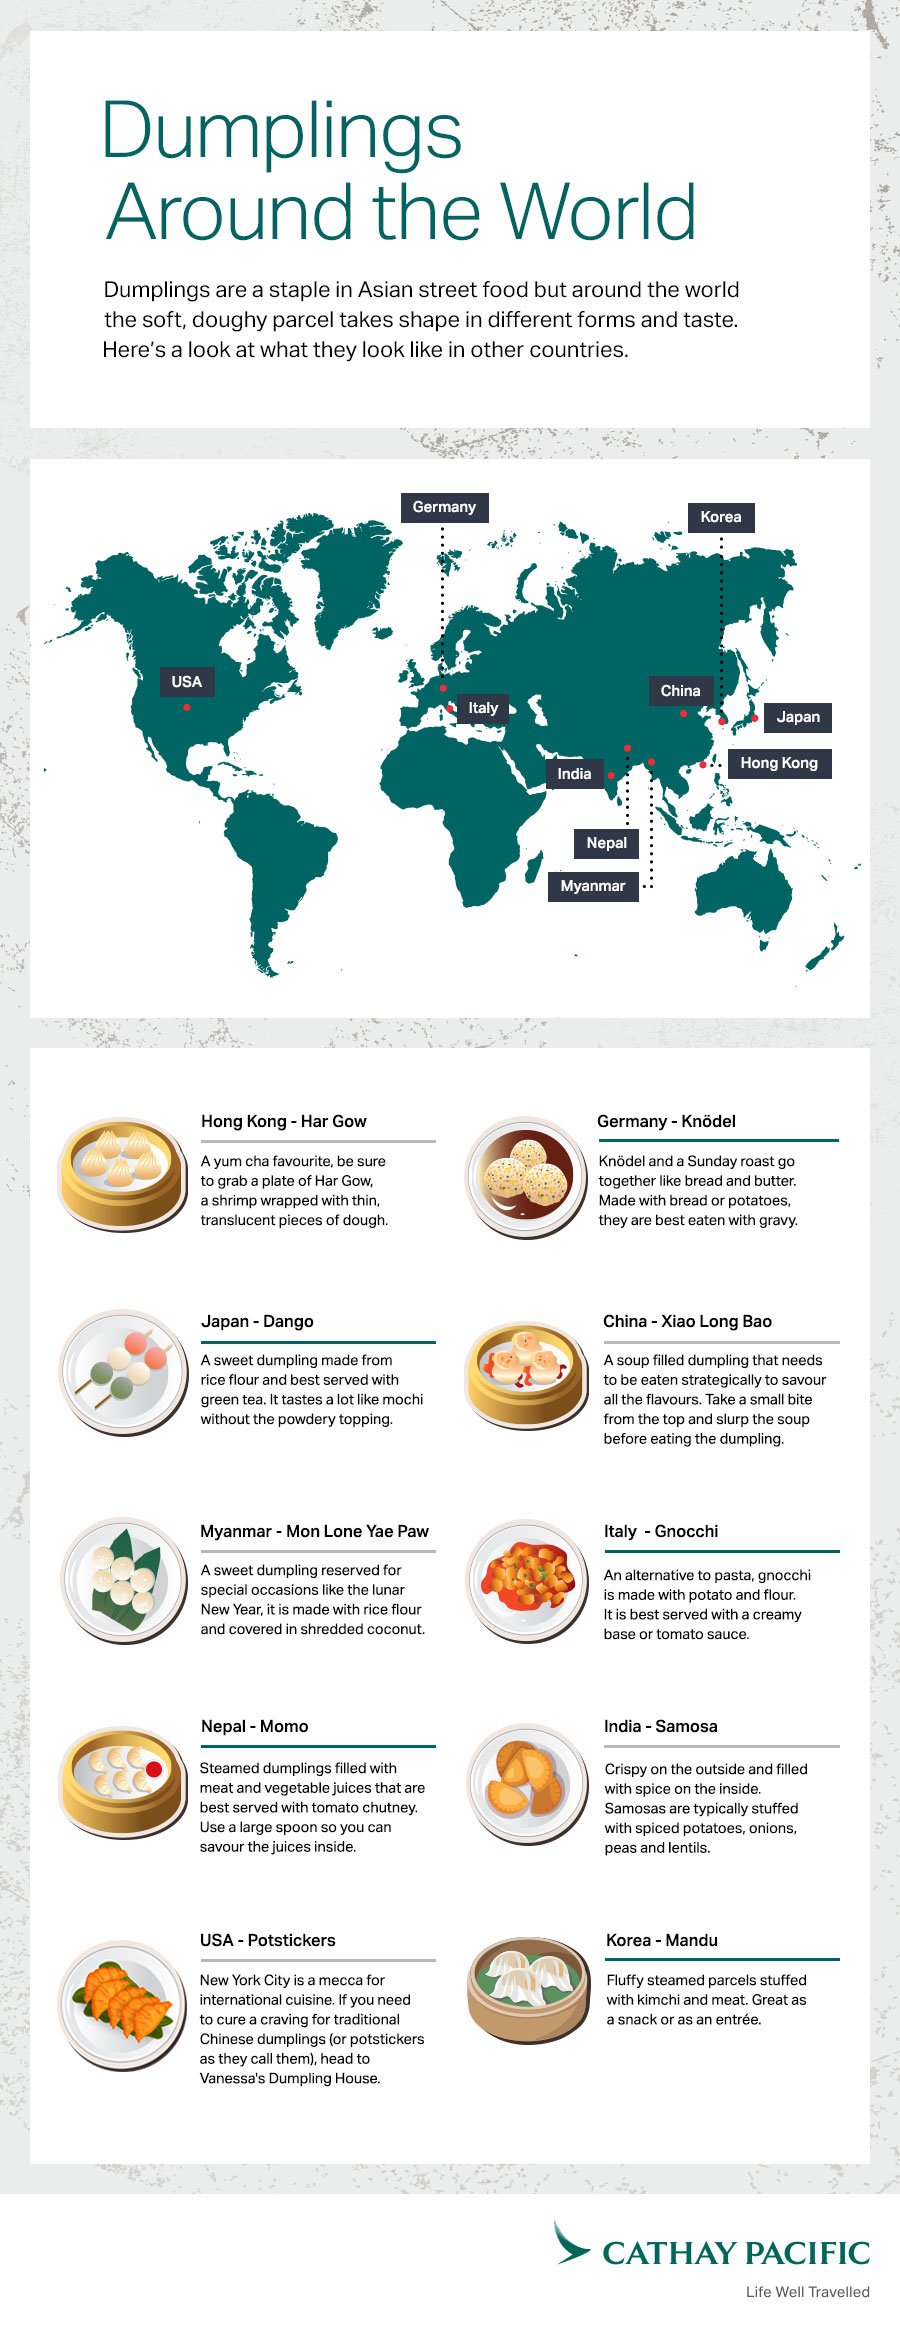 Dumplings from around the world Cathay Pacific